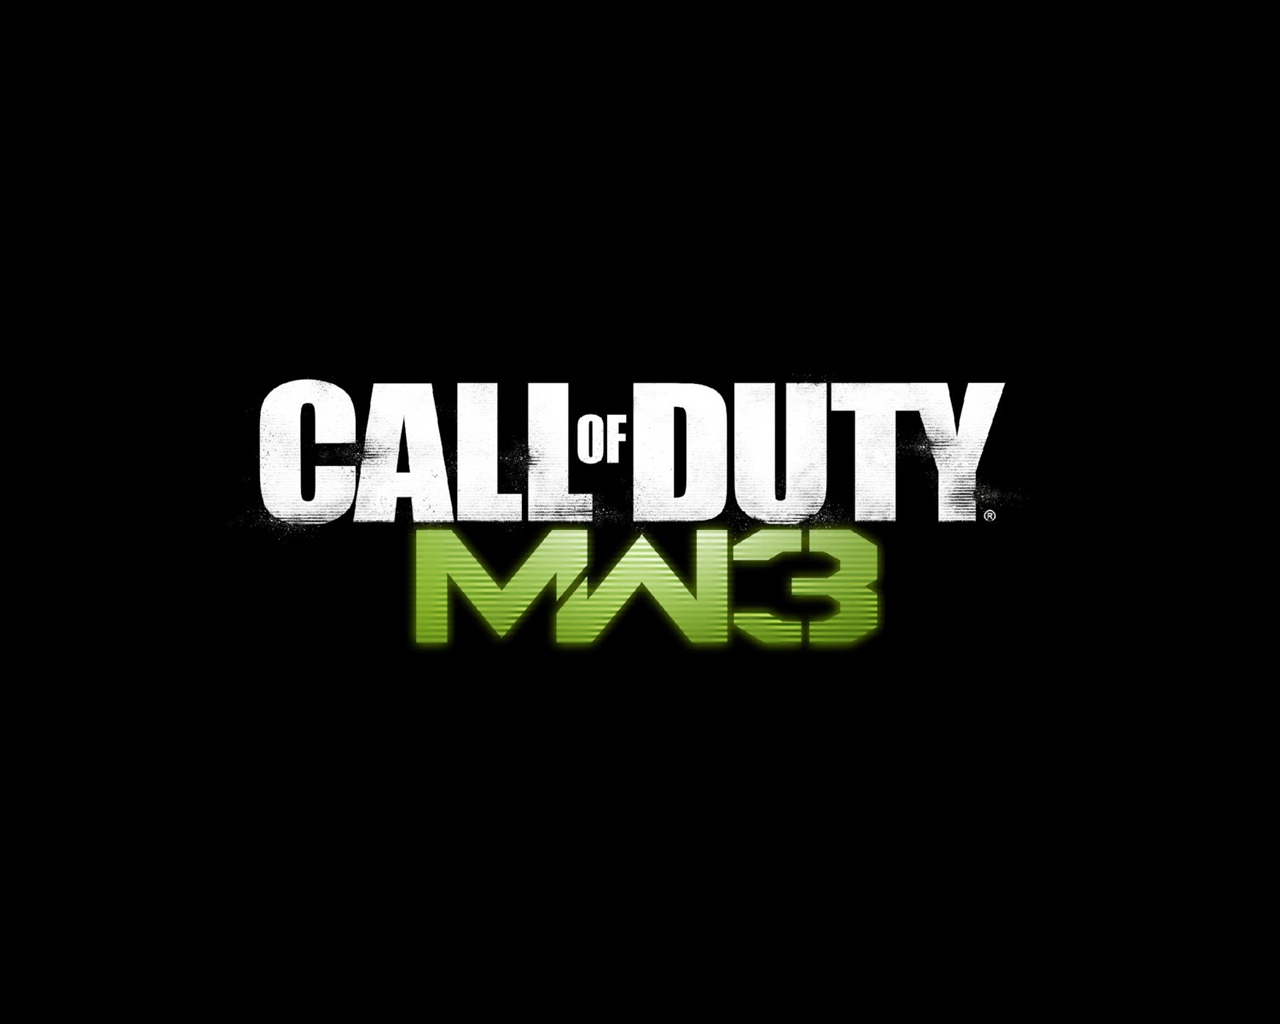 Call of Duty Modern Warfare 3 Game for 1280 x 1024 resolution